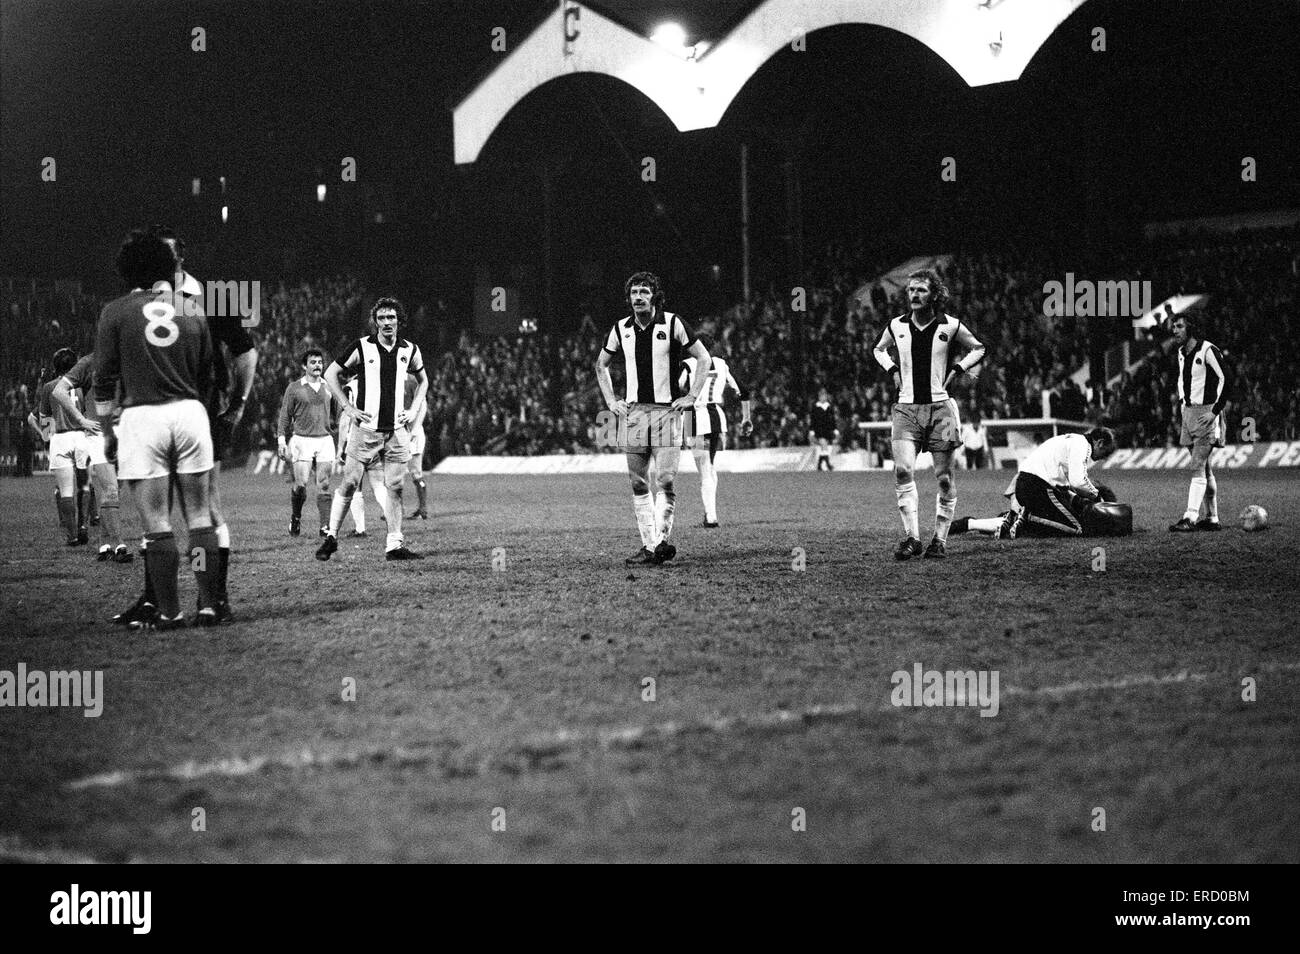 English League Division One match at the Valley. Charlton Athletic 2 West Bromwich Albion 1. Accusing looks from (left to right) Ally Brown, John Wile, Alistair Robertson and Paddy Mulligan in the direction of Charlton striker Derek Hales. The reason for Stock Photo